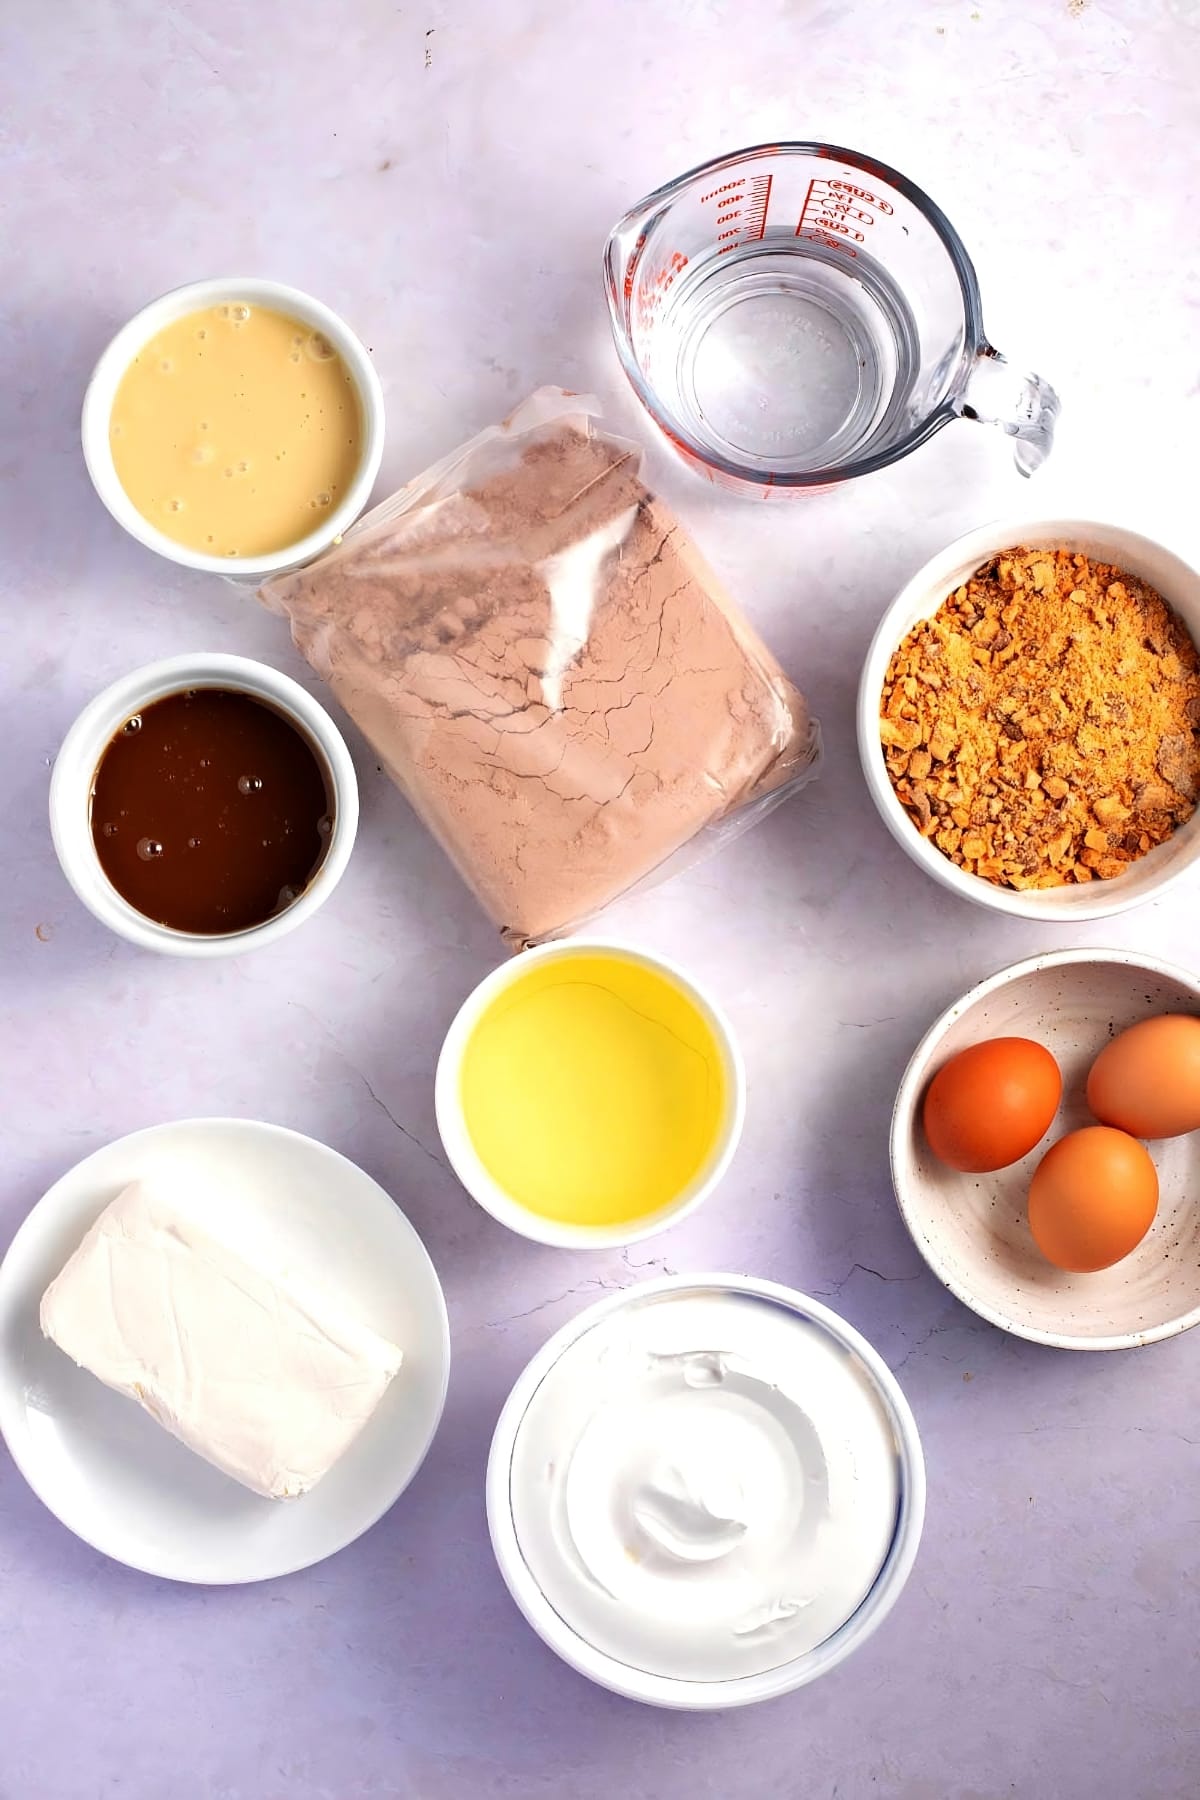 Holy Cow Cake Ingredients - Cake Mix, Eggs, Caramel, Condensed Milk, Butterfinger Candy Bar, Whipped Topping and Cream Cheese